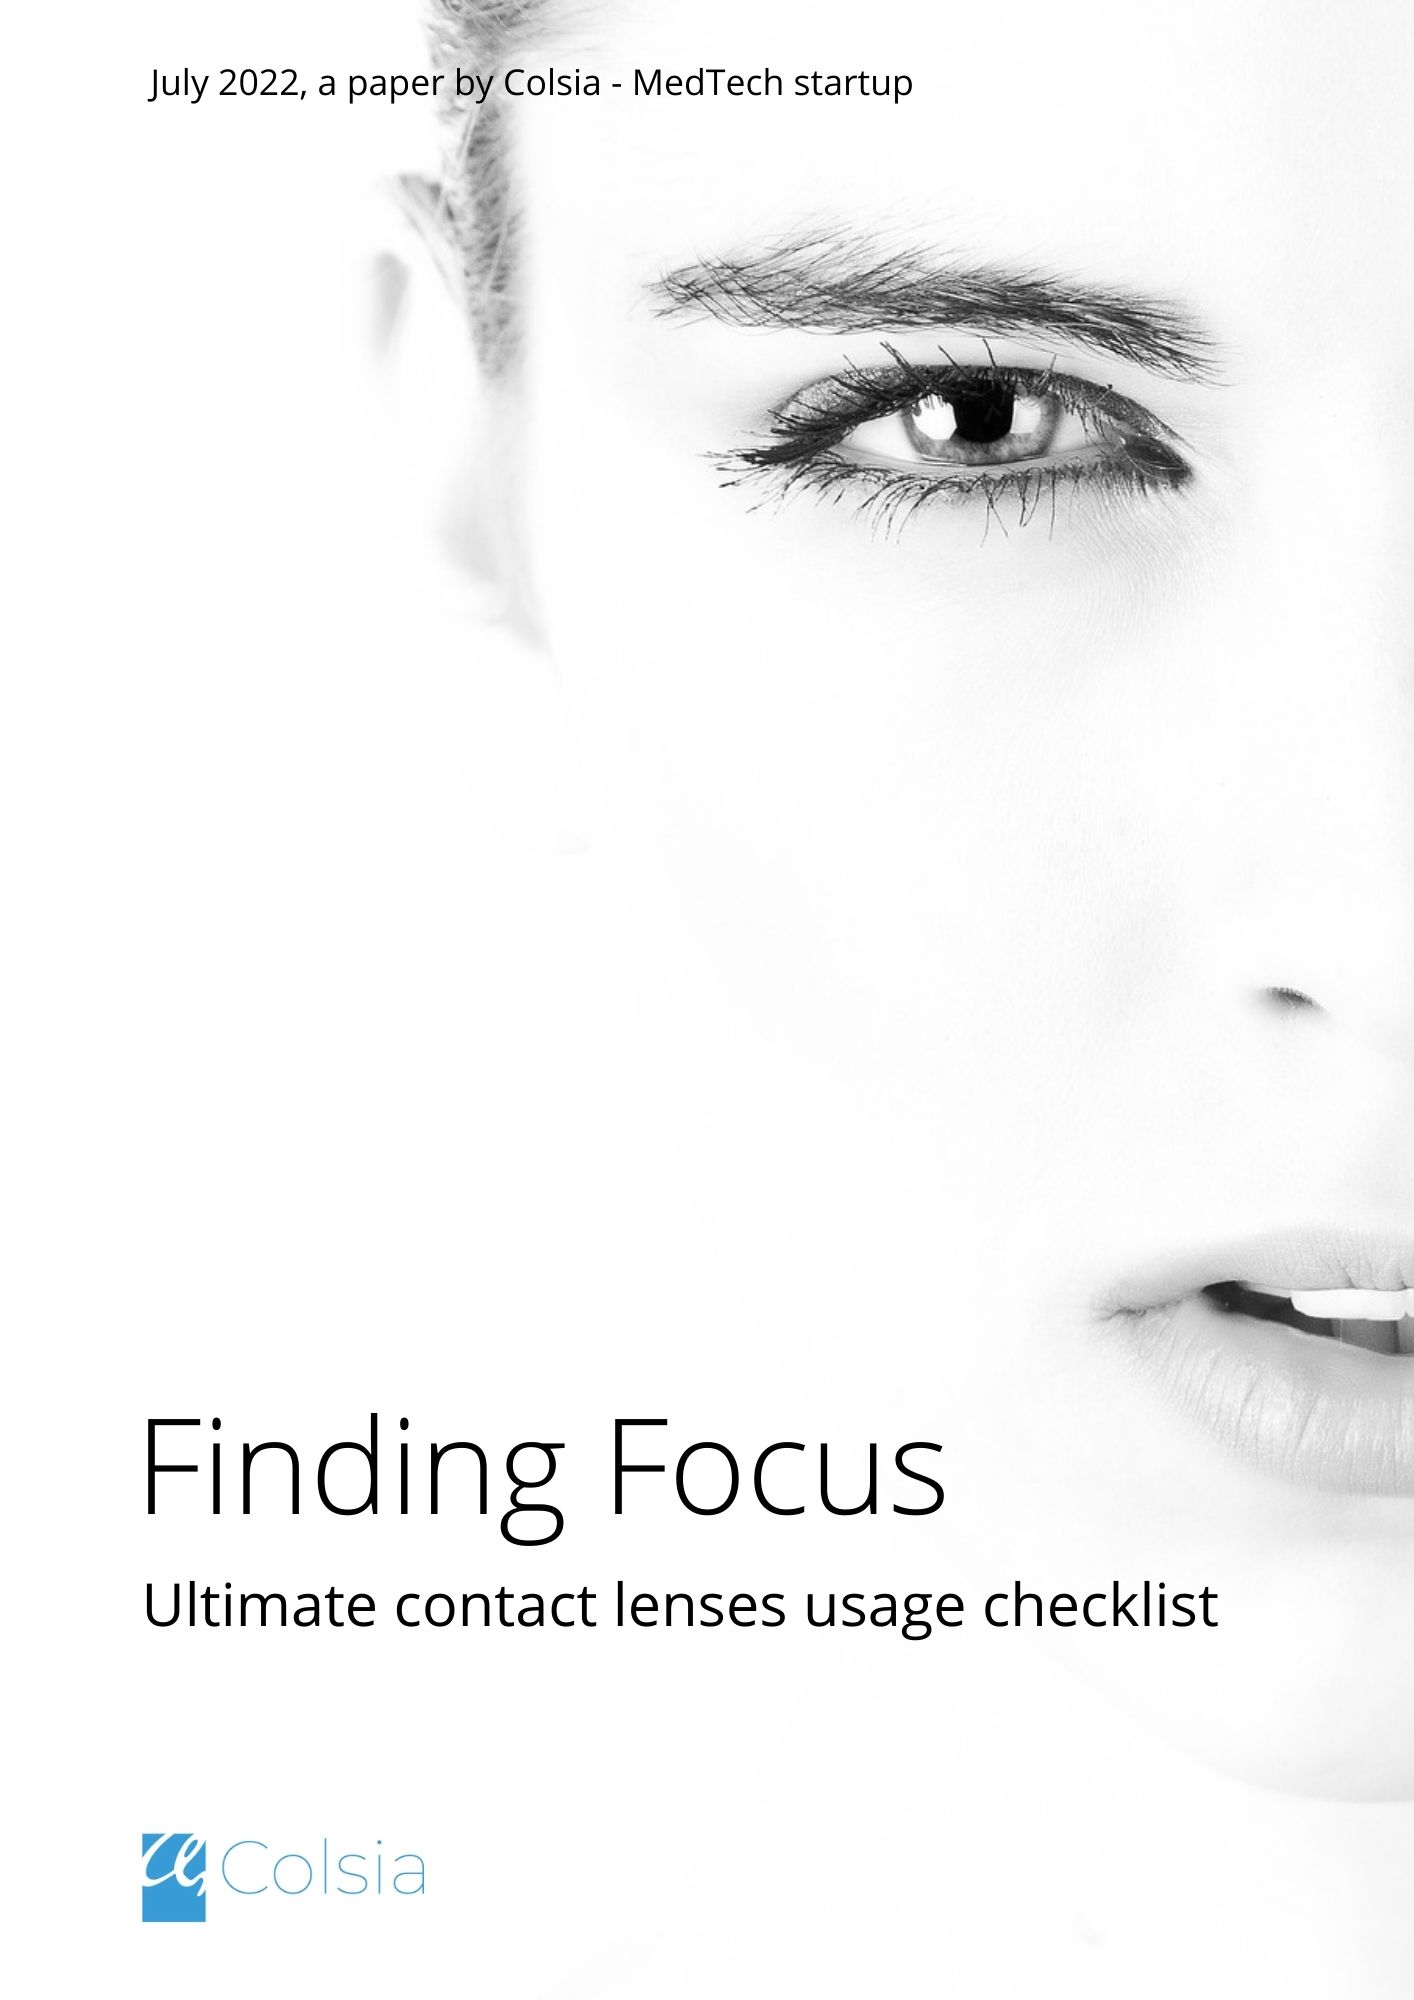 Finding Focus, Magazine for contact lens users